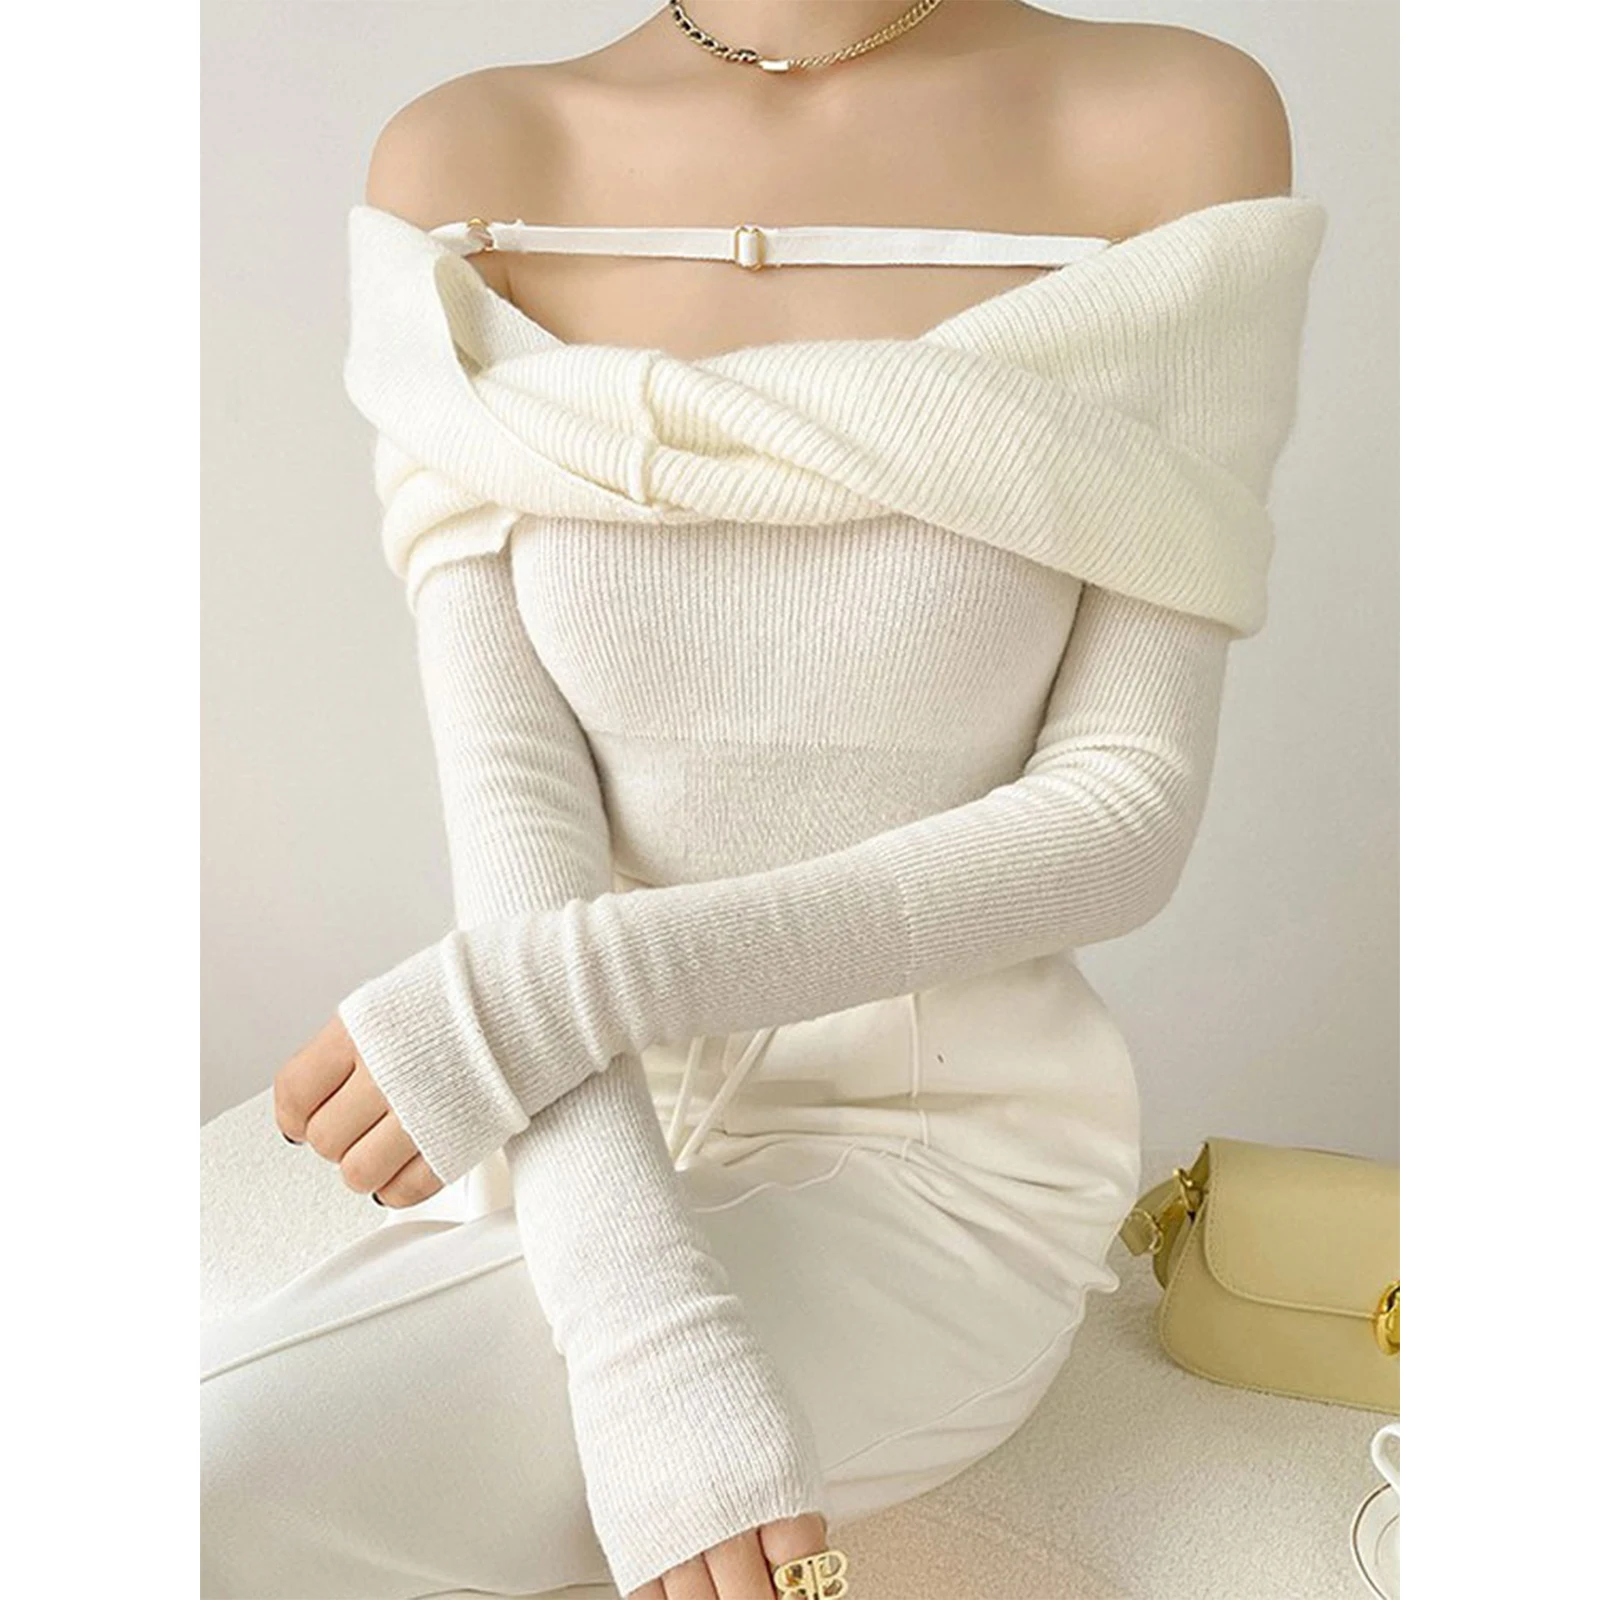 

LCXK 2022 Sping And Summer New Style Knit Jacket with Knotted Shoulder Temperament Commuting Beauty Sweet Jumper Sweater